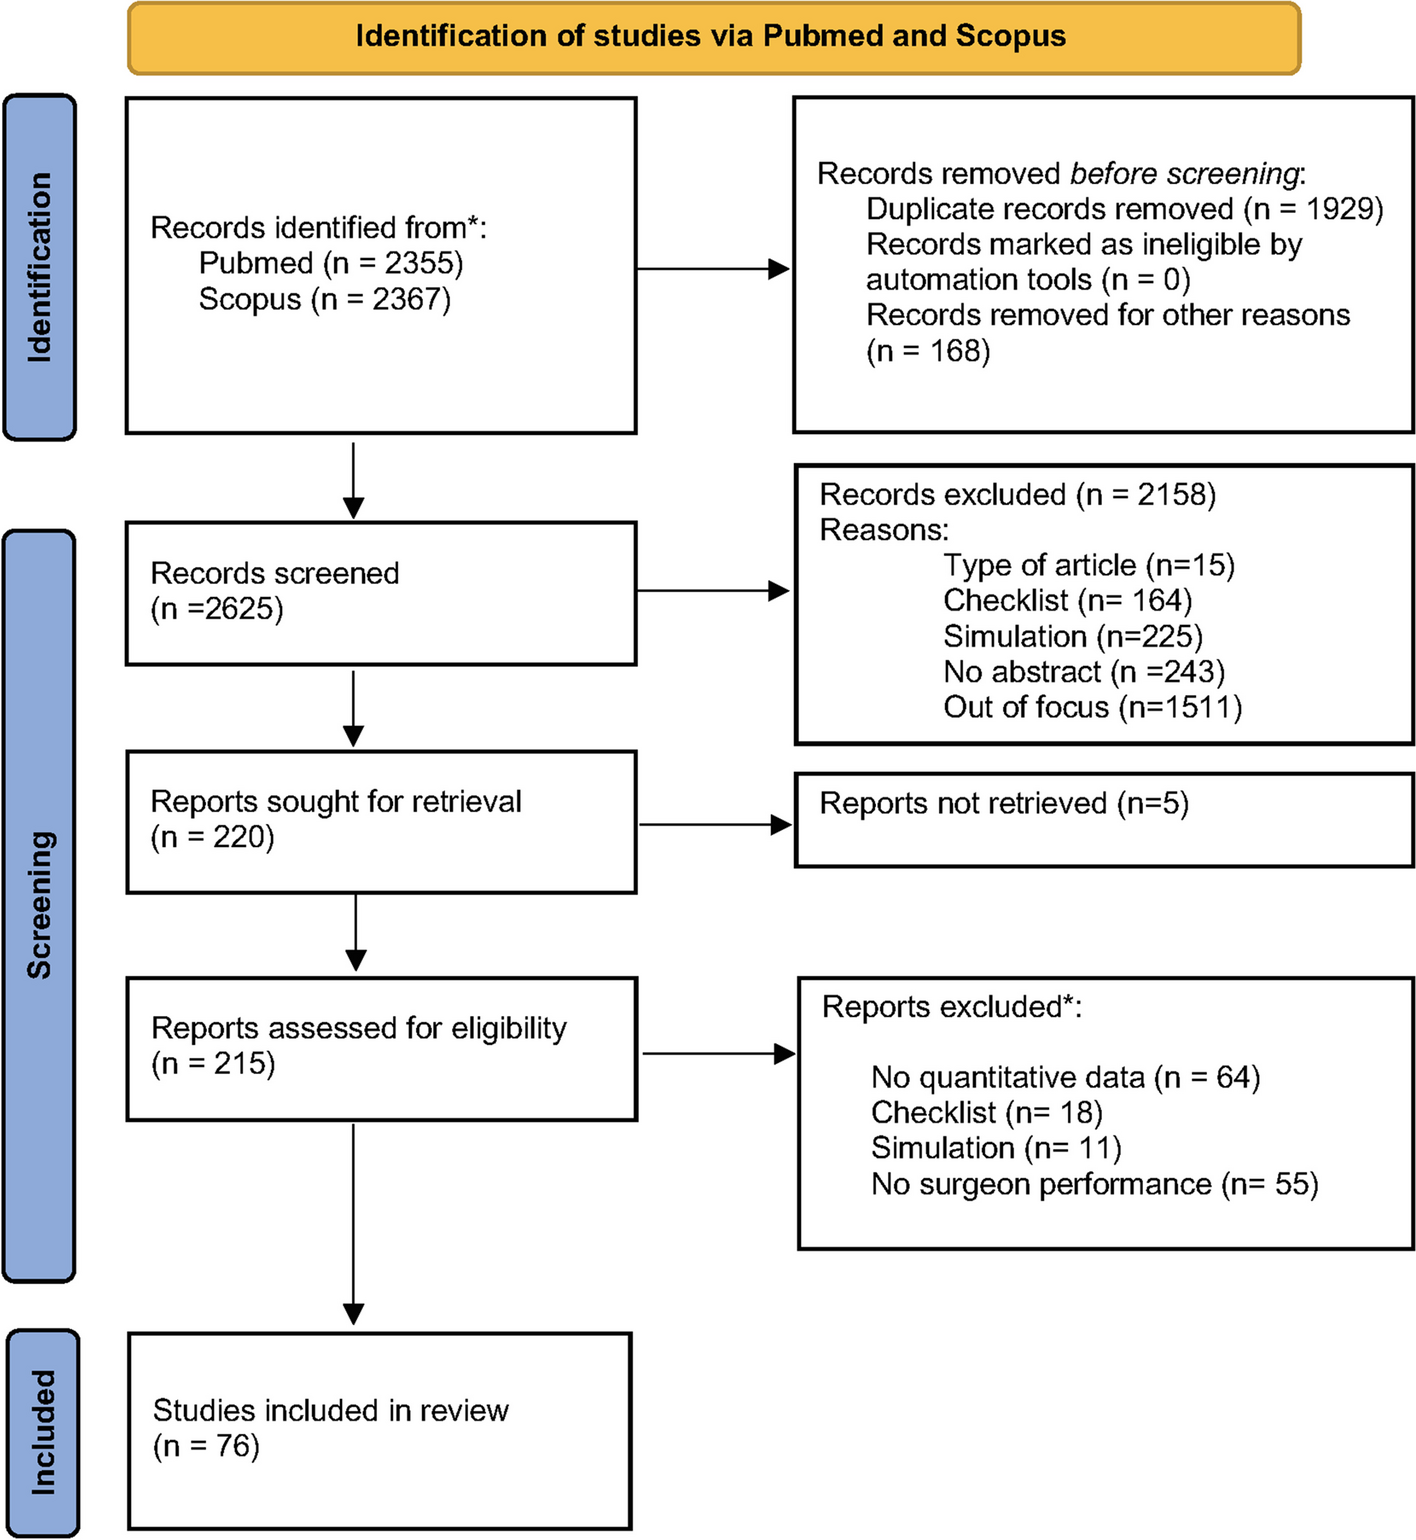 Operating room organization and surgical performance: a systematic review